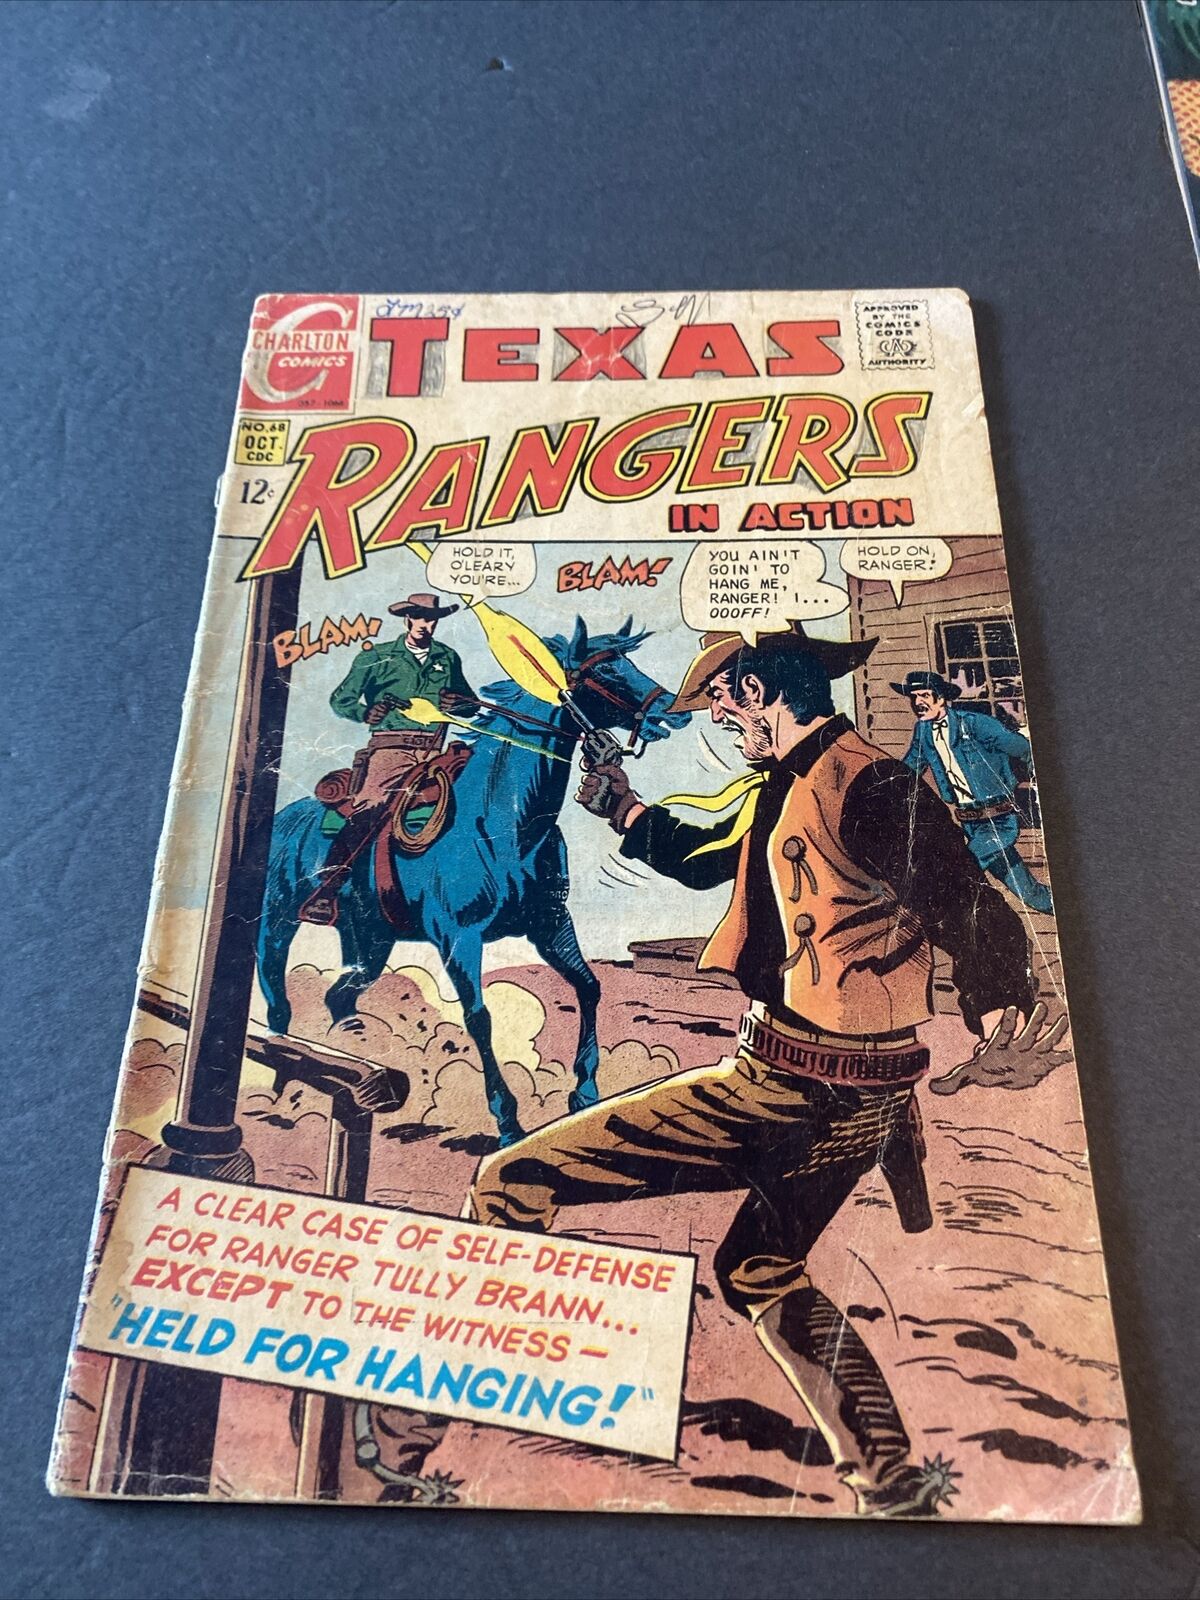 Texas Rangers In Action # 68 GD Charlton Comics Book Silver Age Western